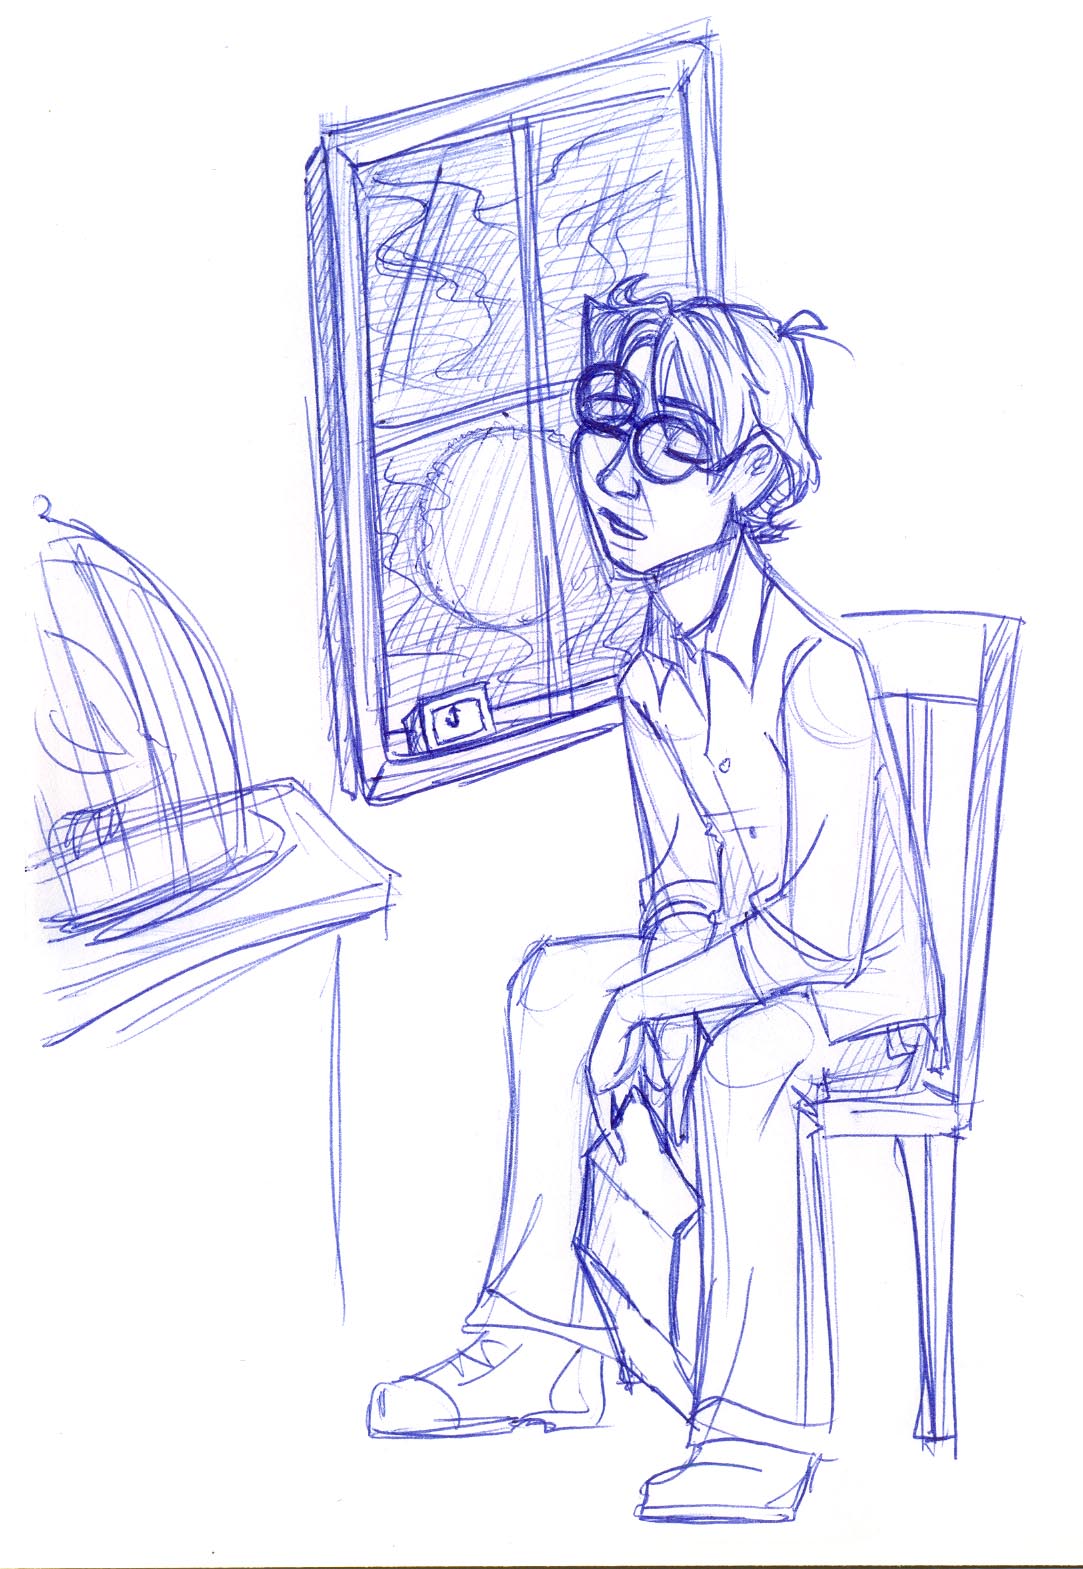 Harry falls asleep at the window, waiting to see if Dumbledore will indeed appear in Surrey